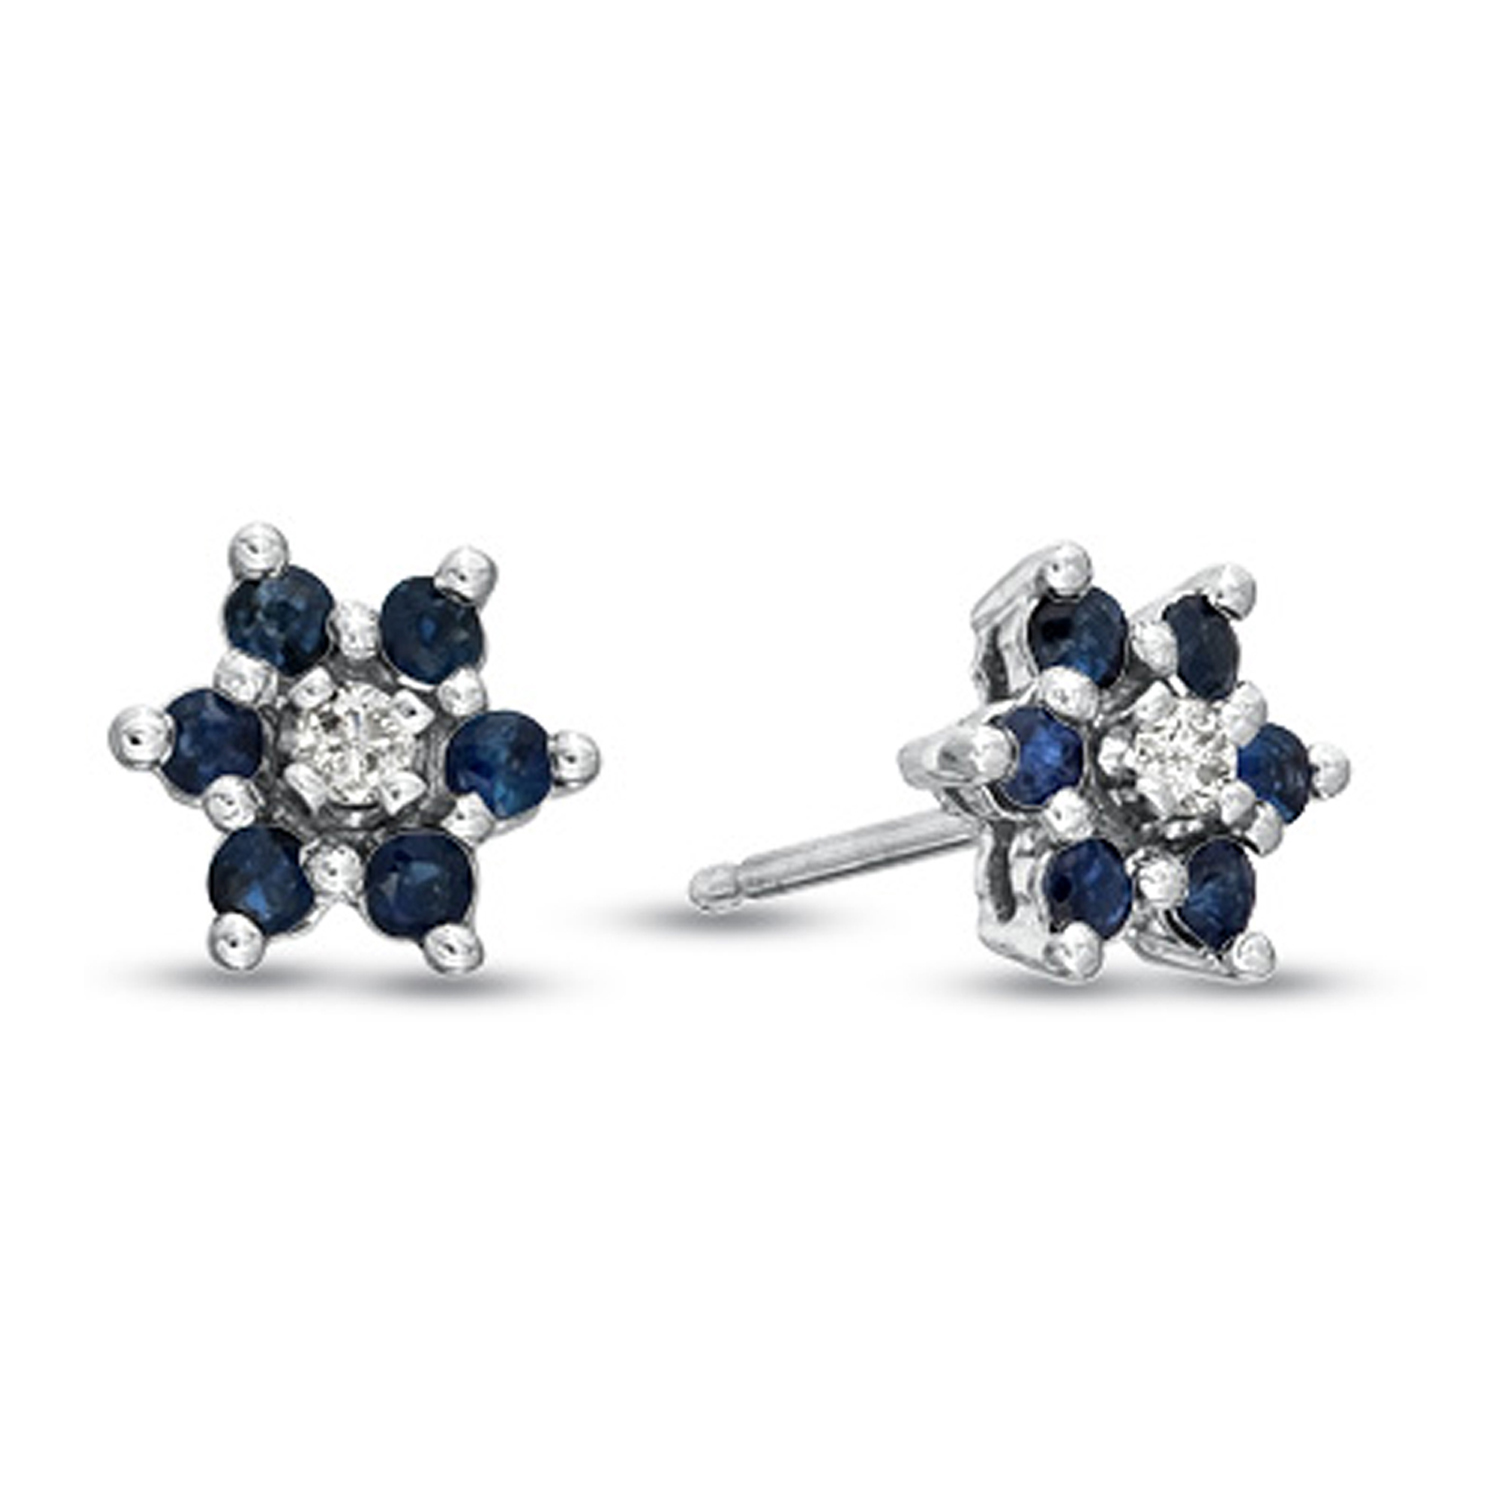 0.48cttw Sapphire and Diamond Flower Cluster Earrings set in 14k Gold